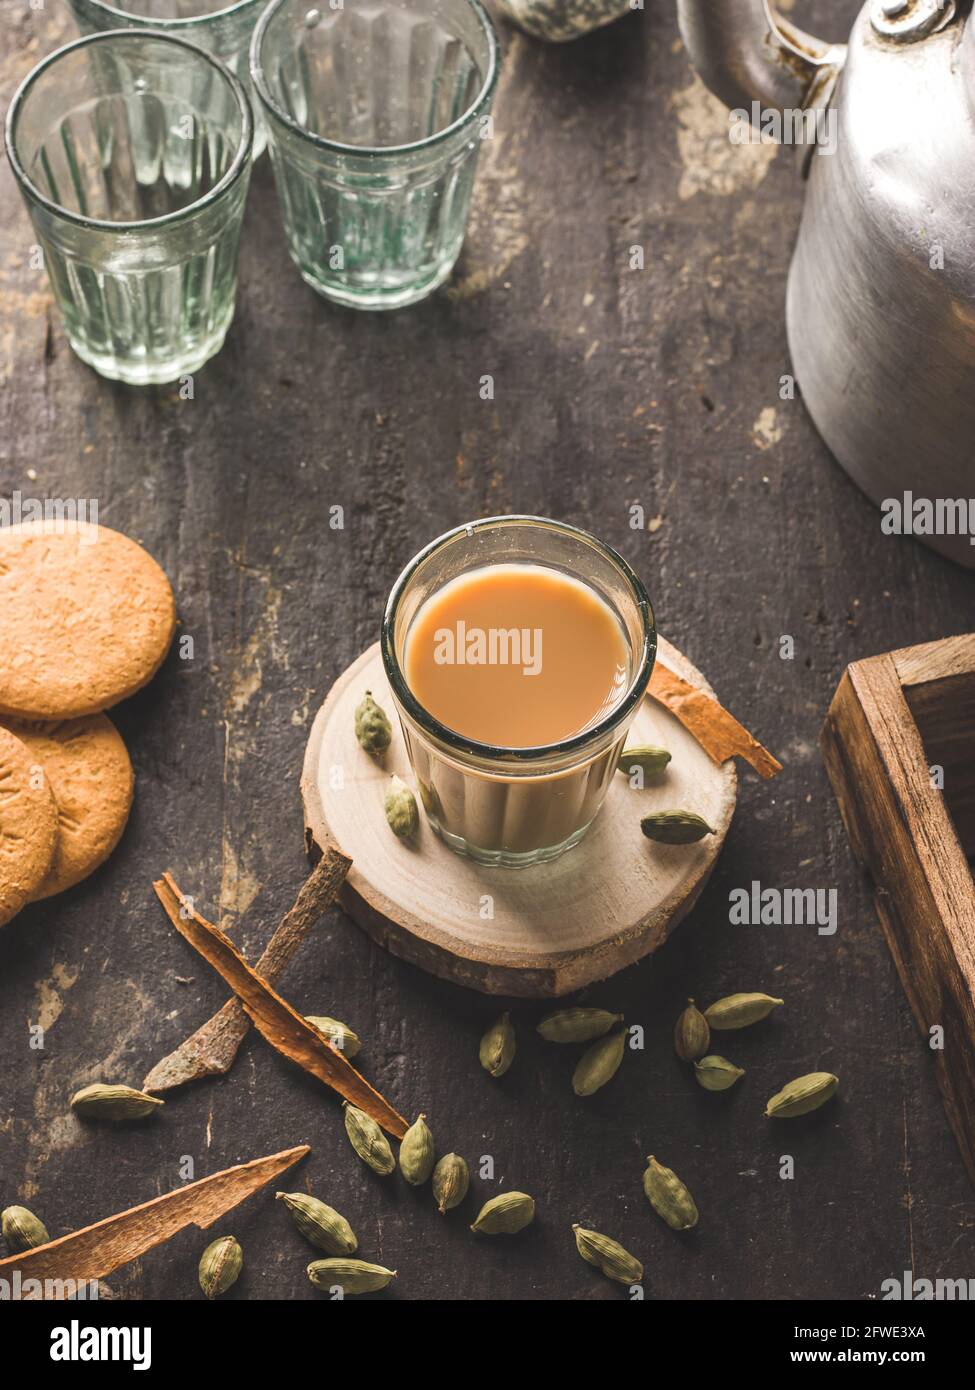 https://c8.alamy.com/comp/2FWE3XA/indian-chai-in-glass-cups-with-metal-kettle-and-other-masalas-to-make-the-tea-2FWE3XA.jpg